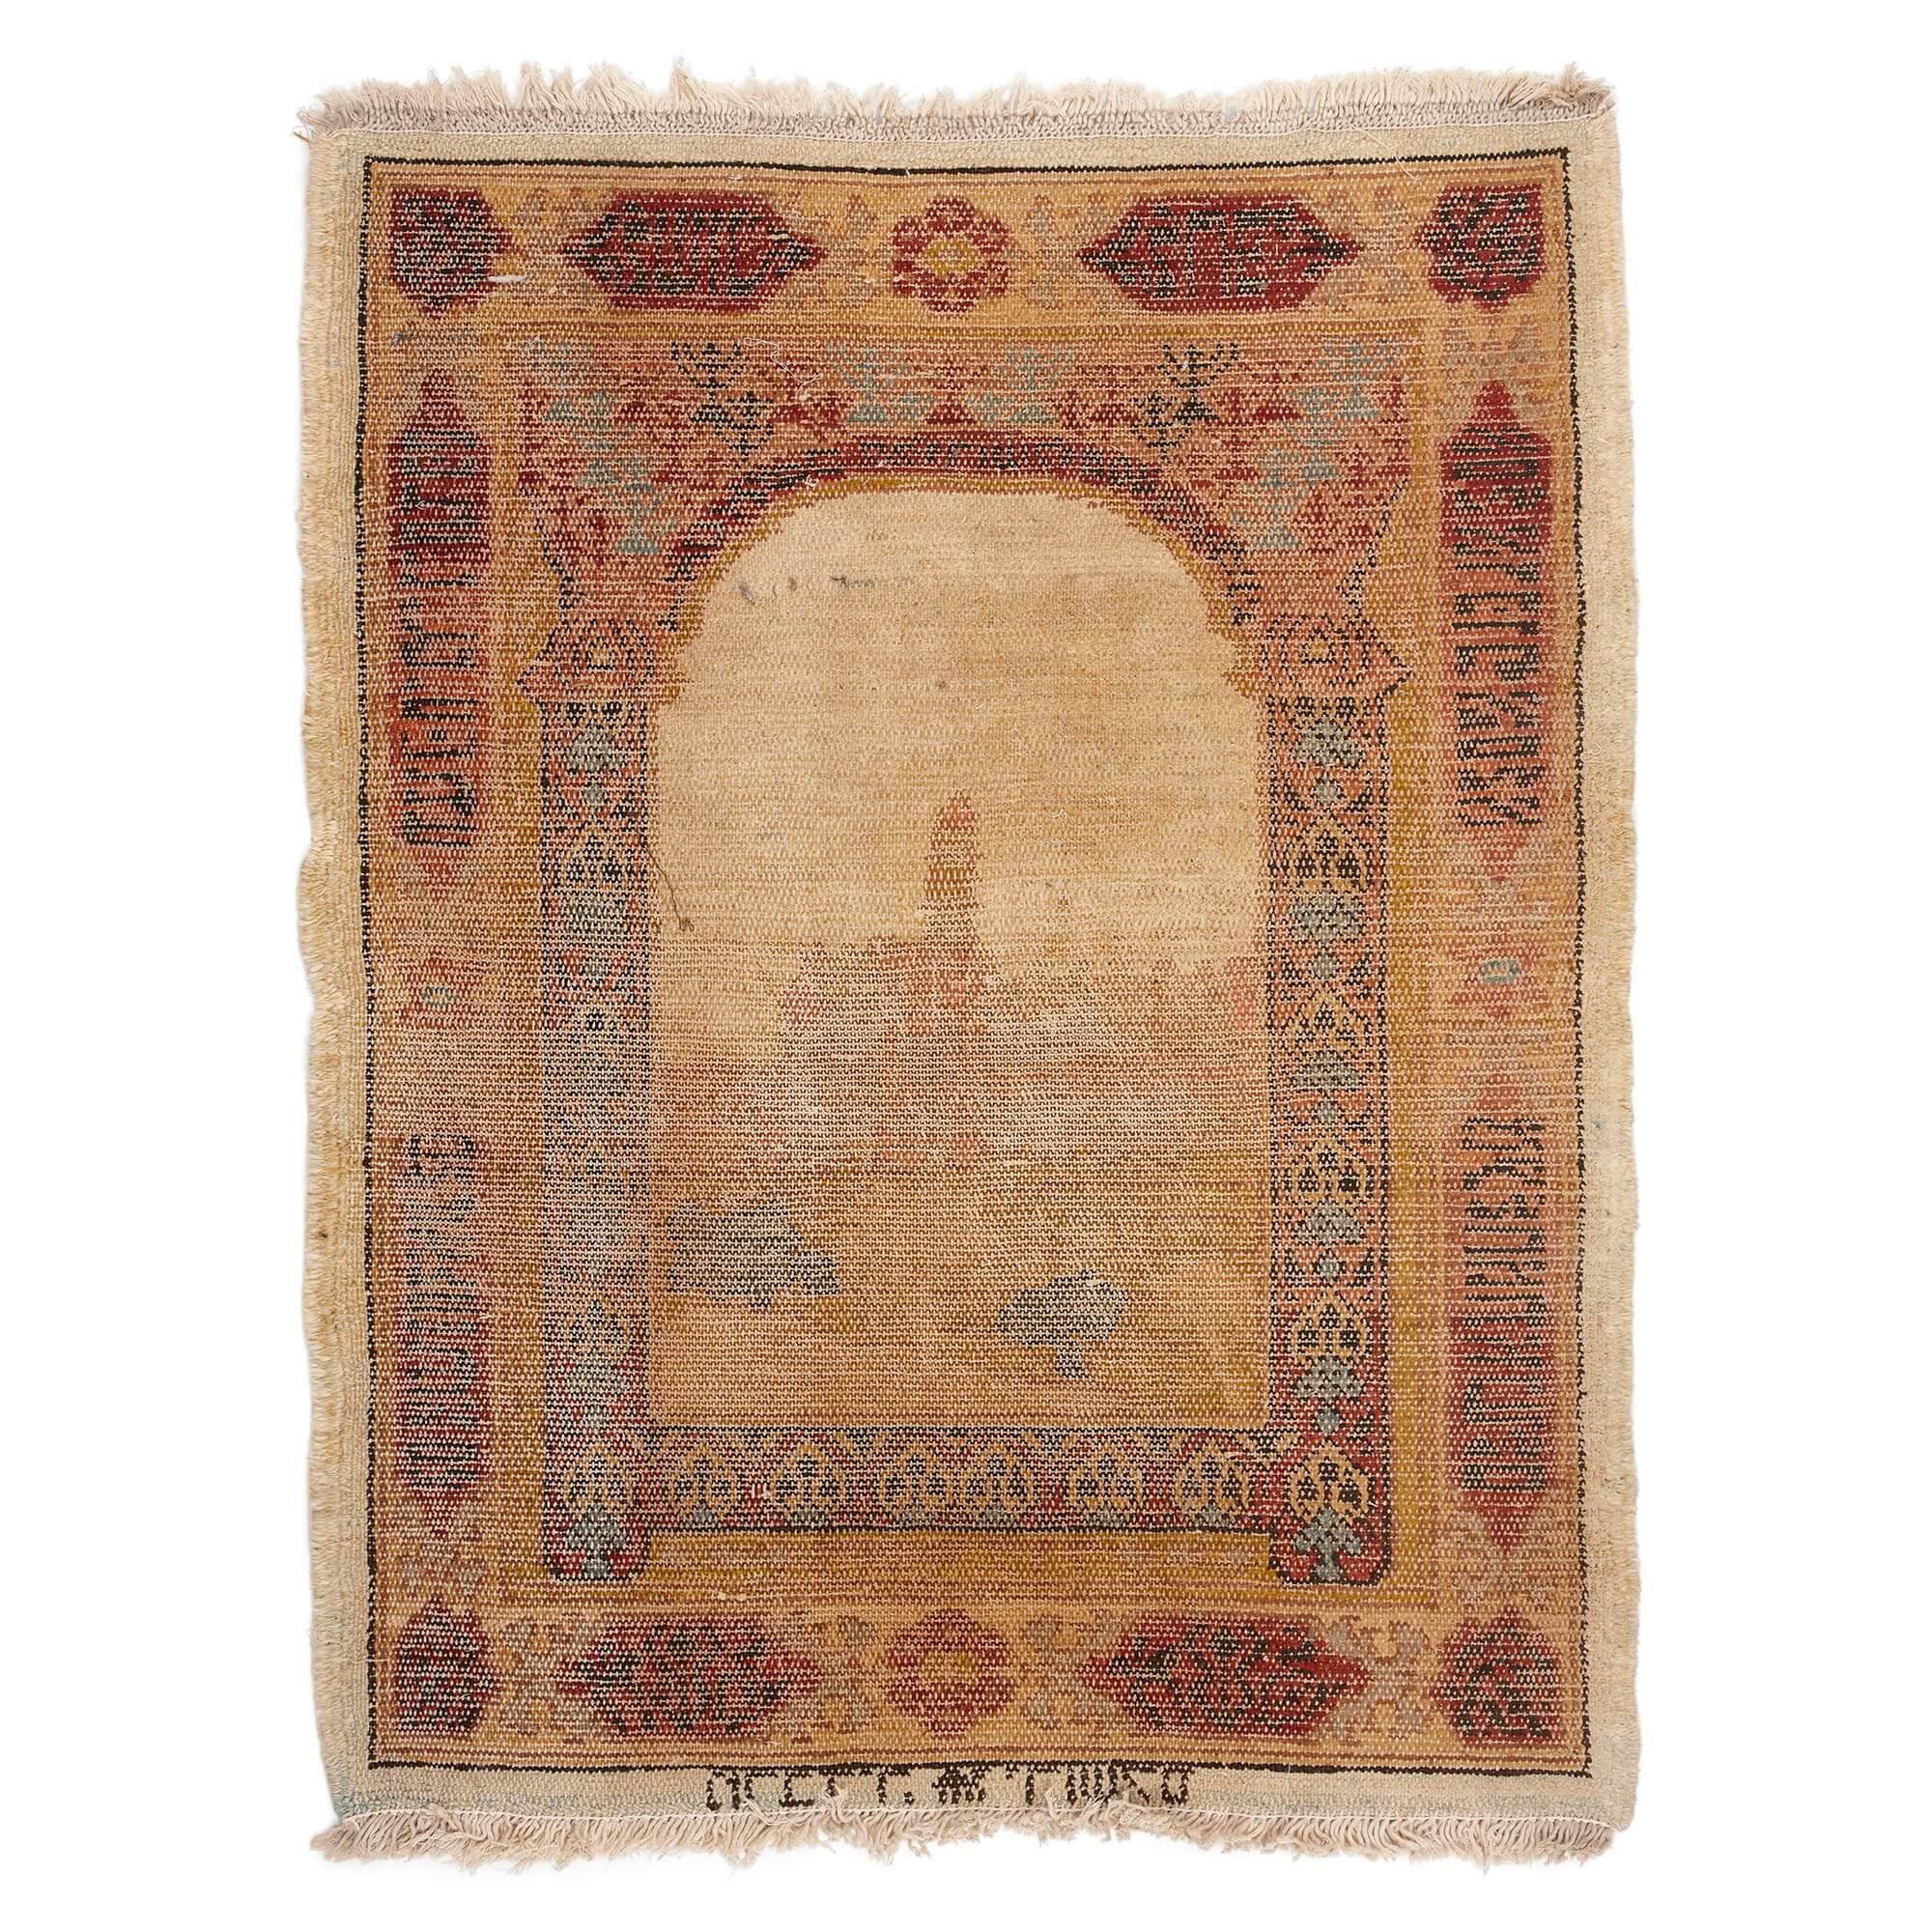 Marbediah rug depicting views of Jerusalem 
Israel, c. 1920
Height 94cm, width 70cm

Woven in the early 20th century, the medium-sized rug’s design wonderfully illustrates a landscape view of Jerusalem alongside Hebrew writing. 

The central panel